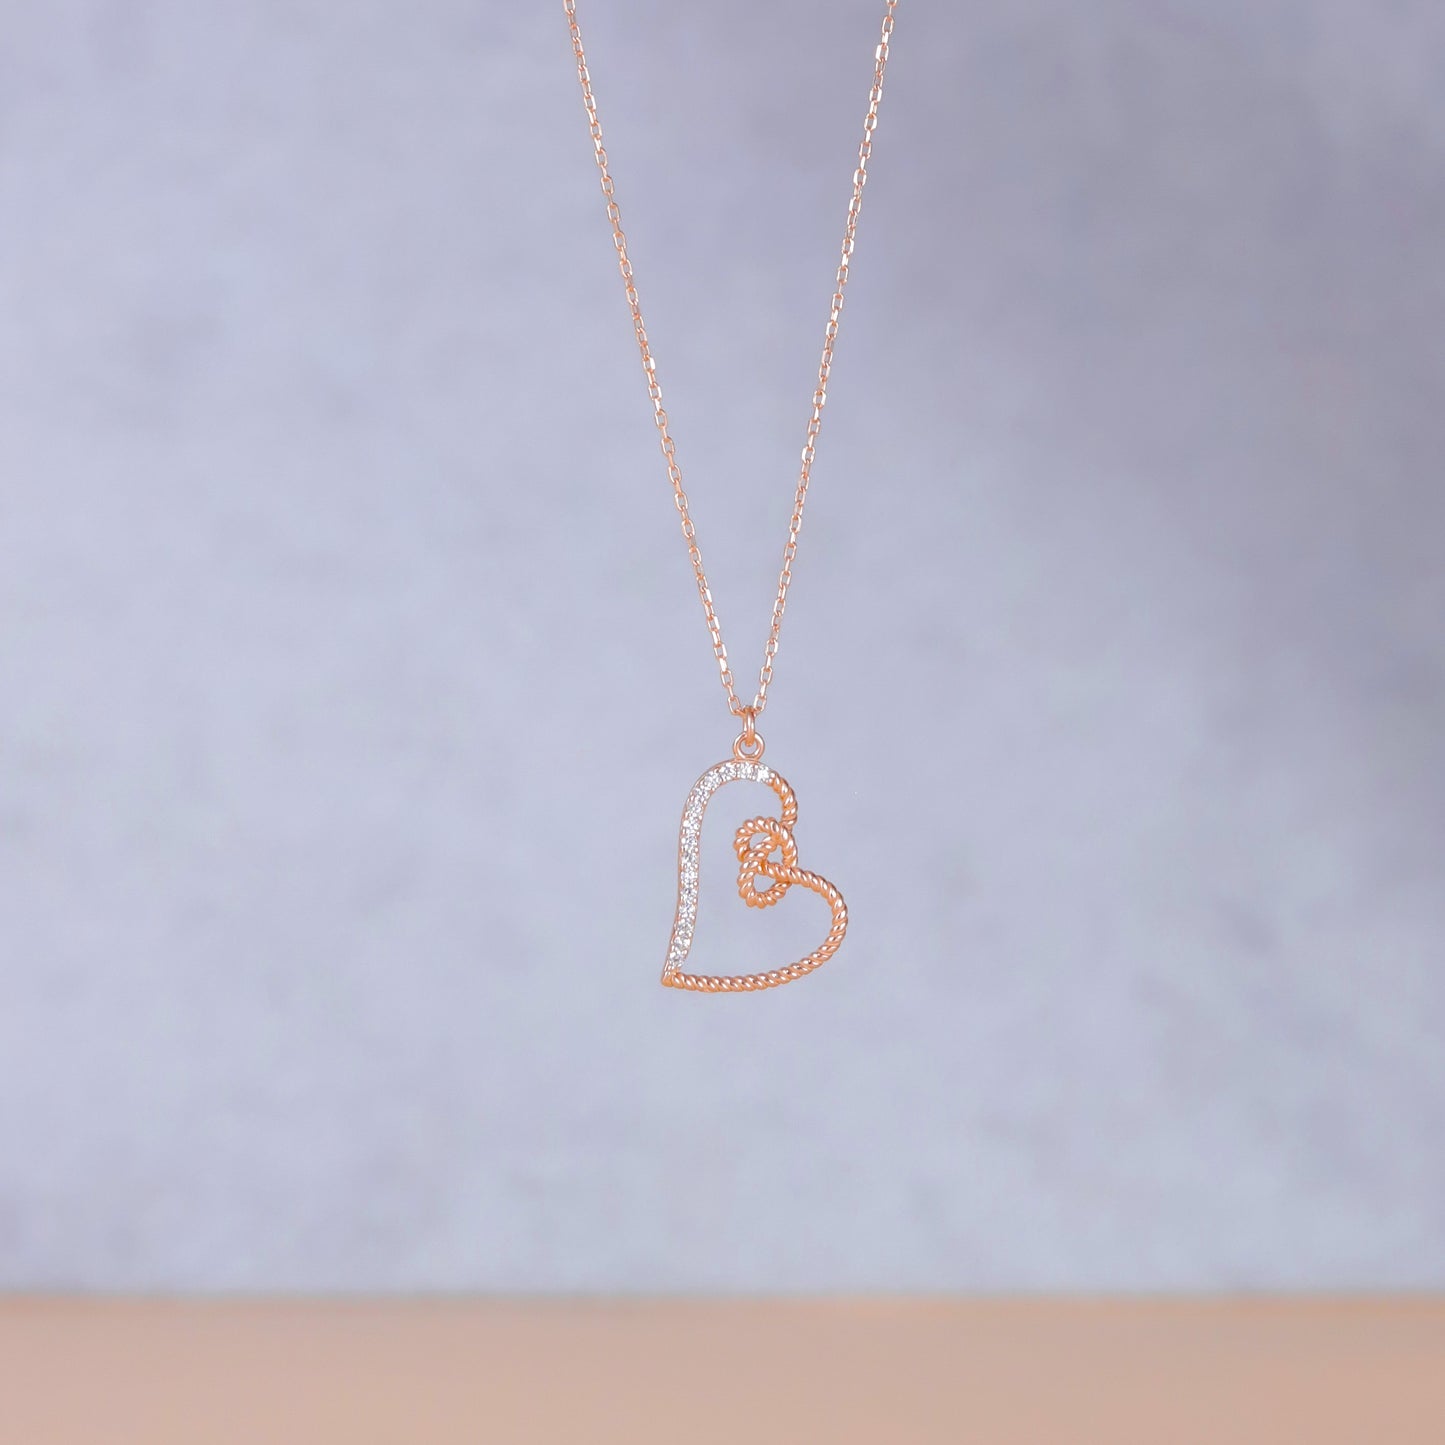 925 Sterling Silver Love Knot Heart Necklace